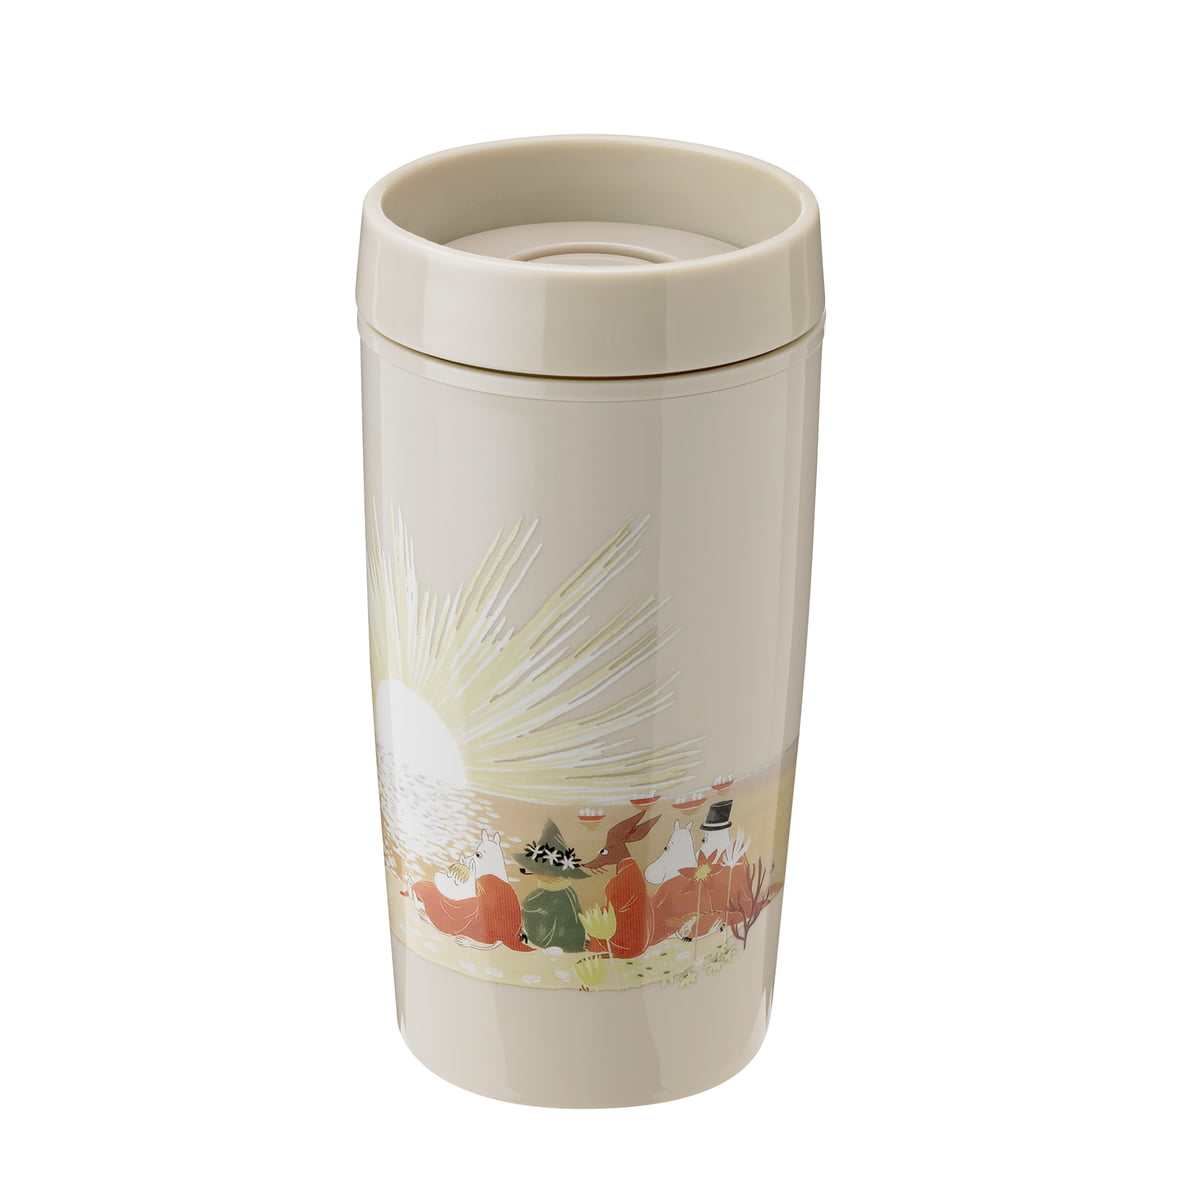 RIG-TIG by Stelton - Bring-It Moomin To-Go Becher 0.34 l, sand